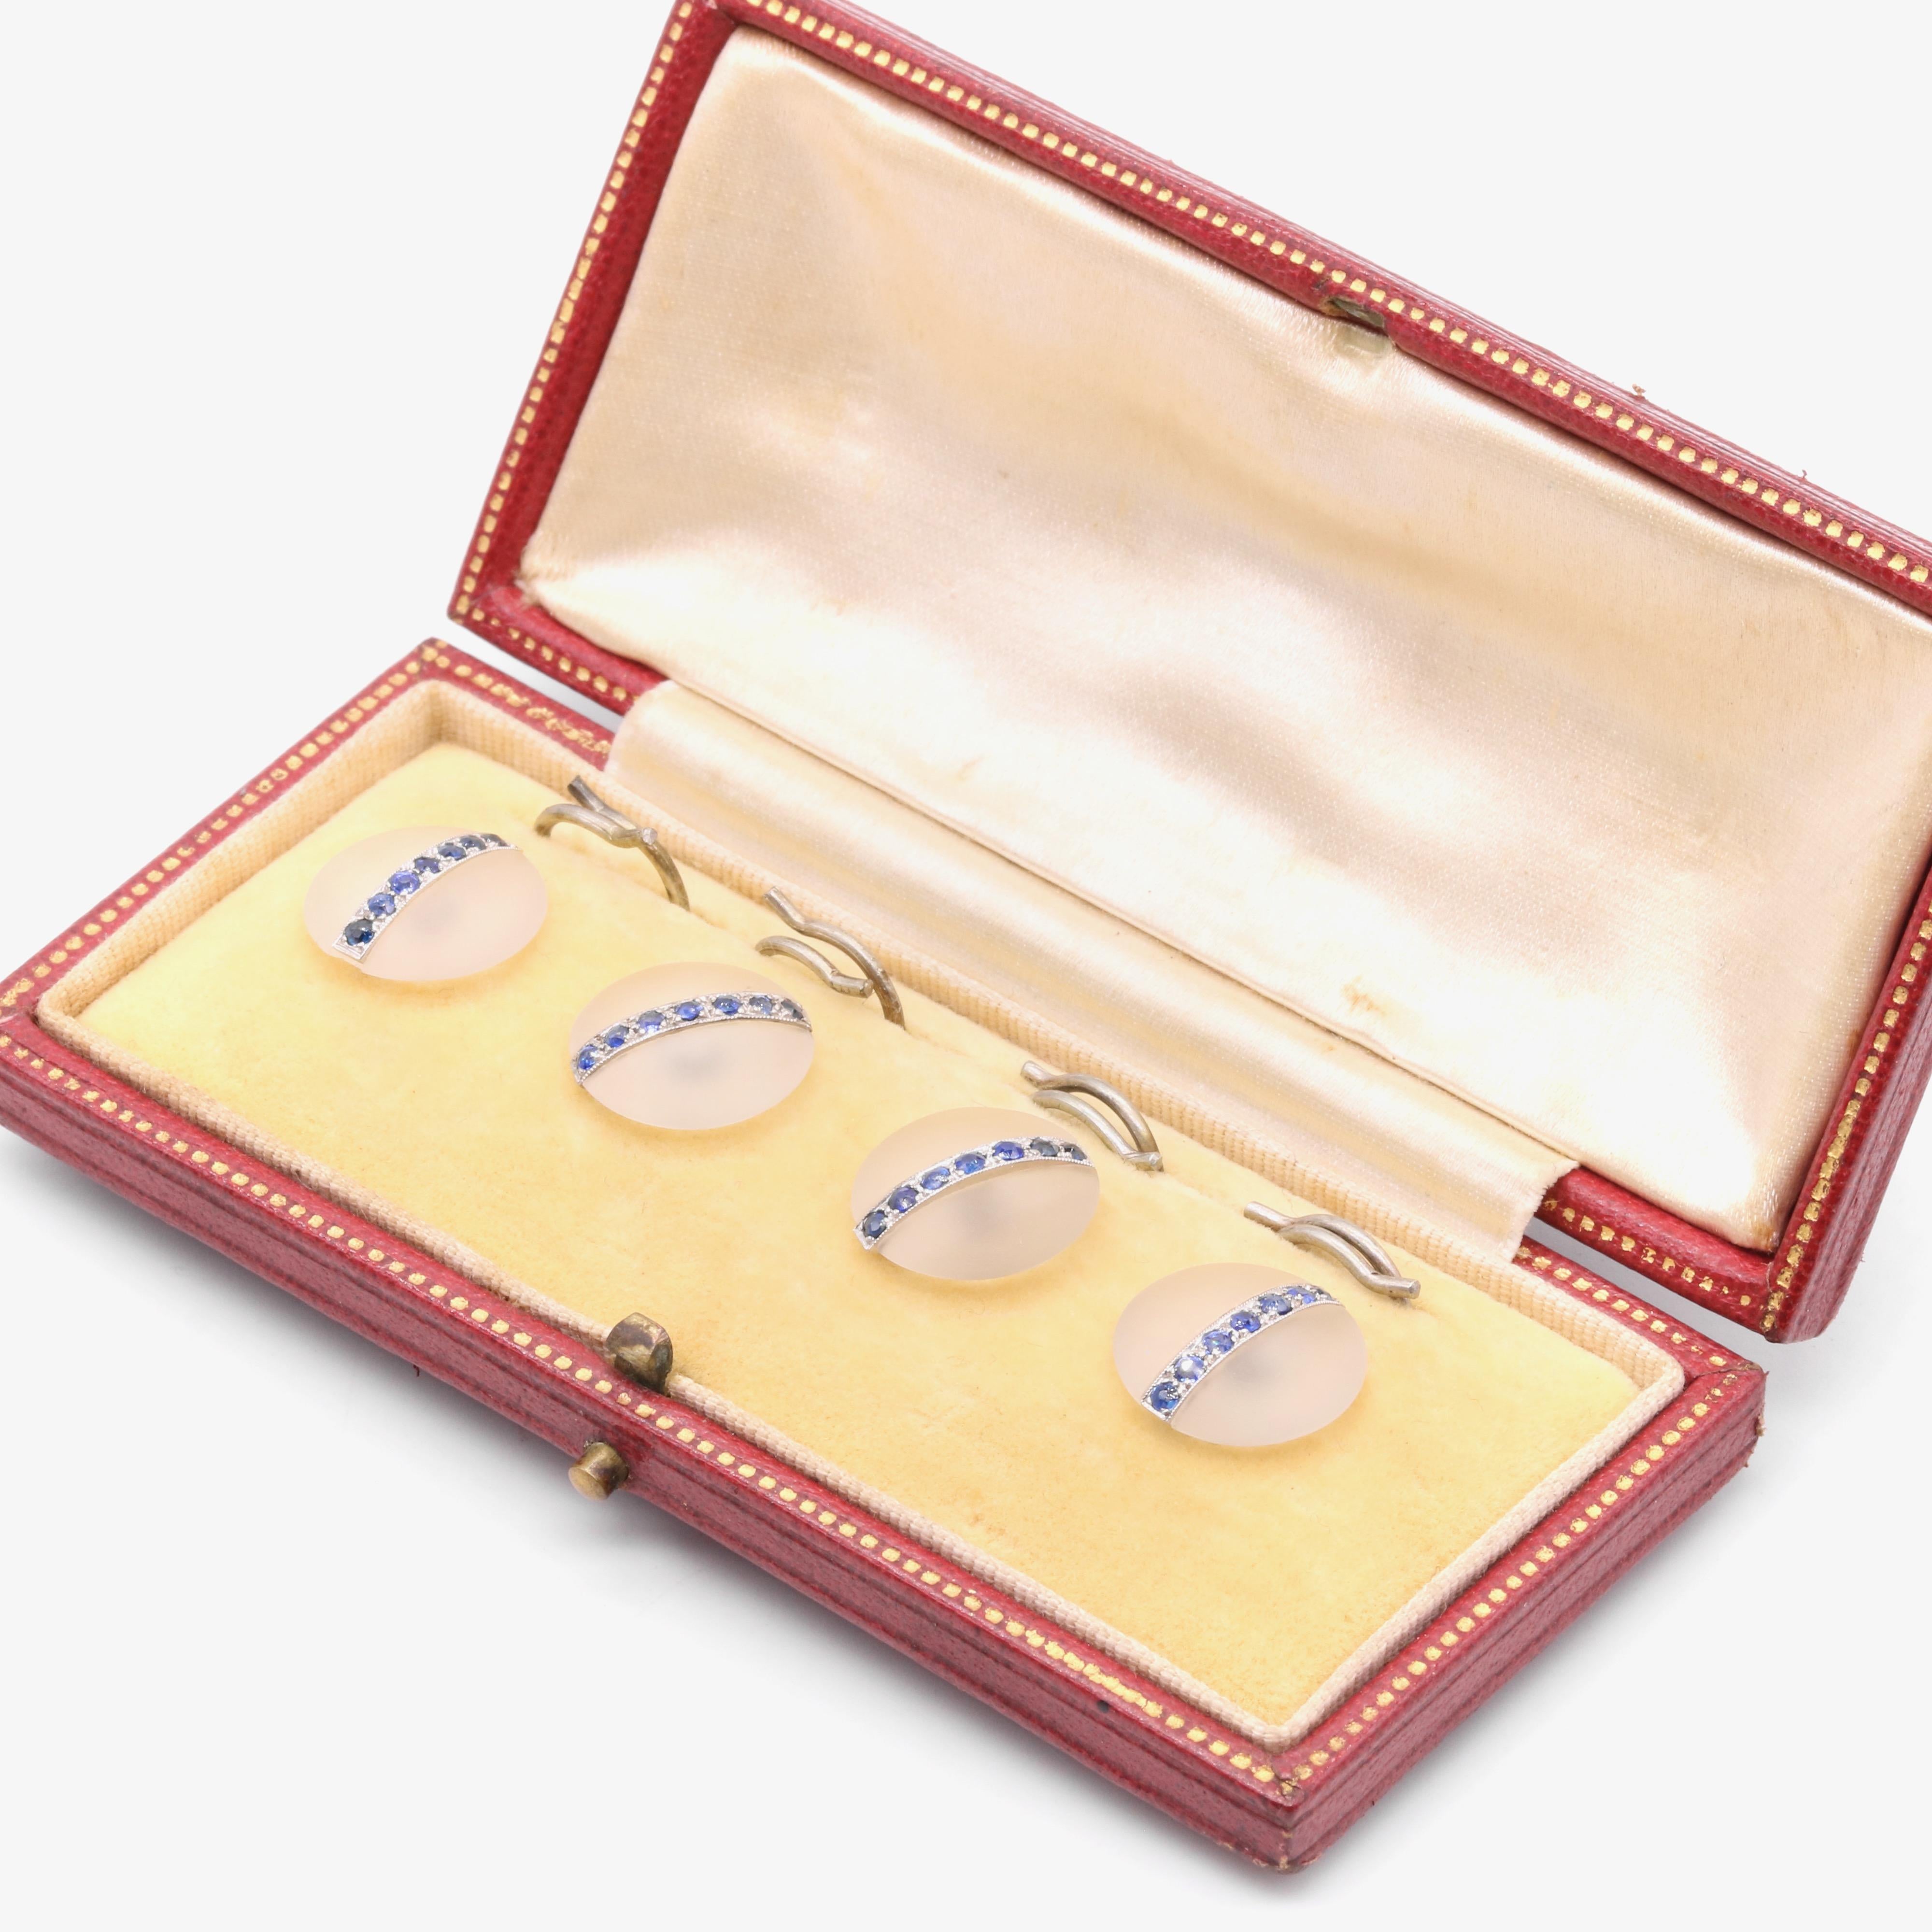 A set of four sapphire, rock crystal, and platinum dress studs, each comprising one round cabochon of frosted rock crystal, and seven sapphires, set in platinum, with platinum backs. 

The dress studs are beautifully designed, creating a real